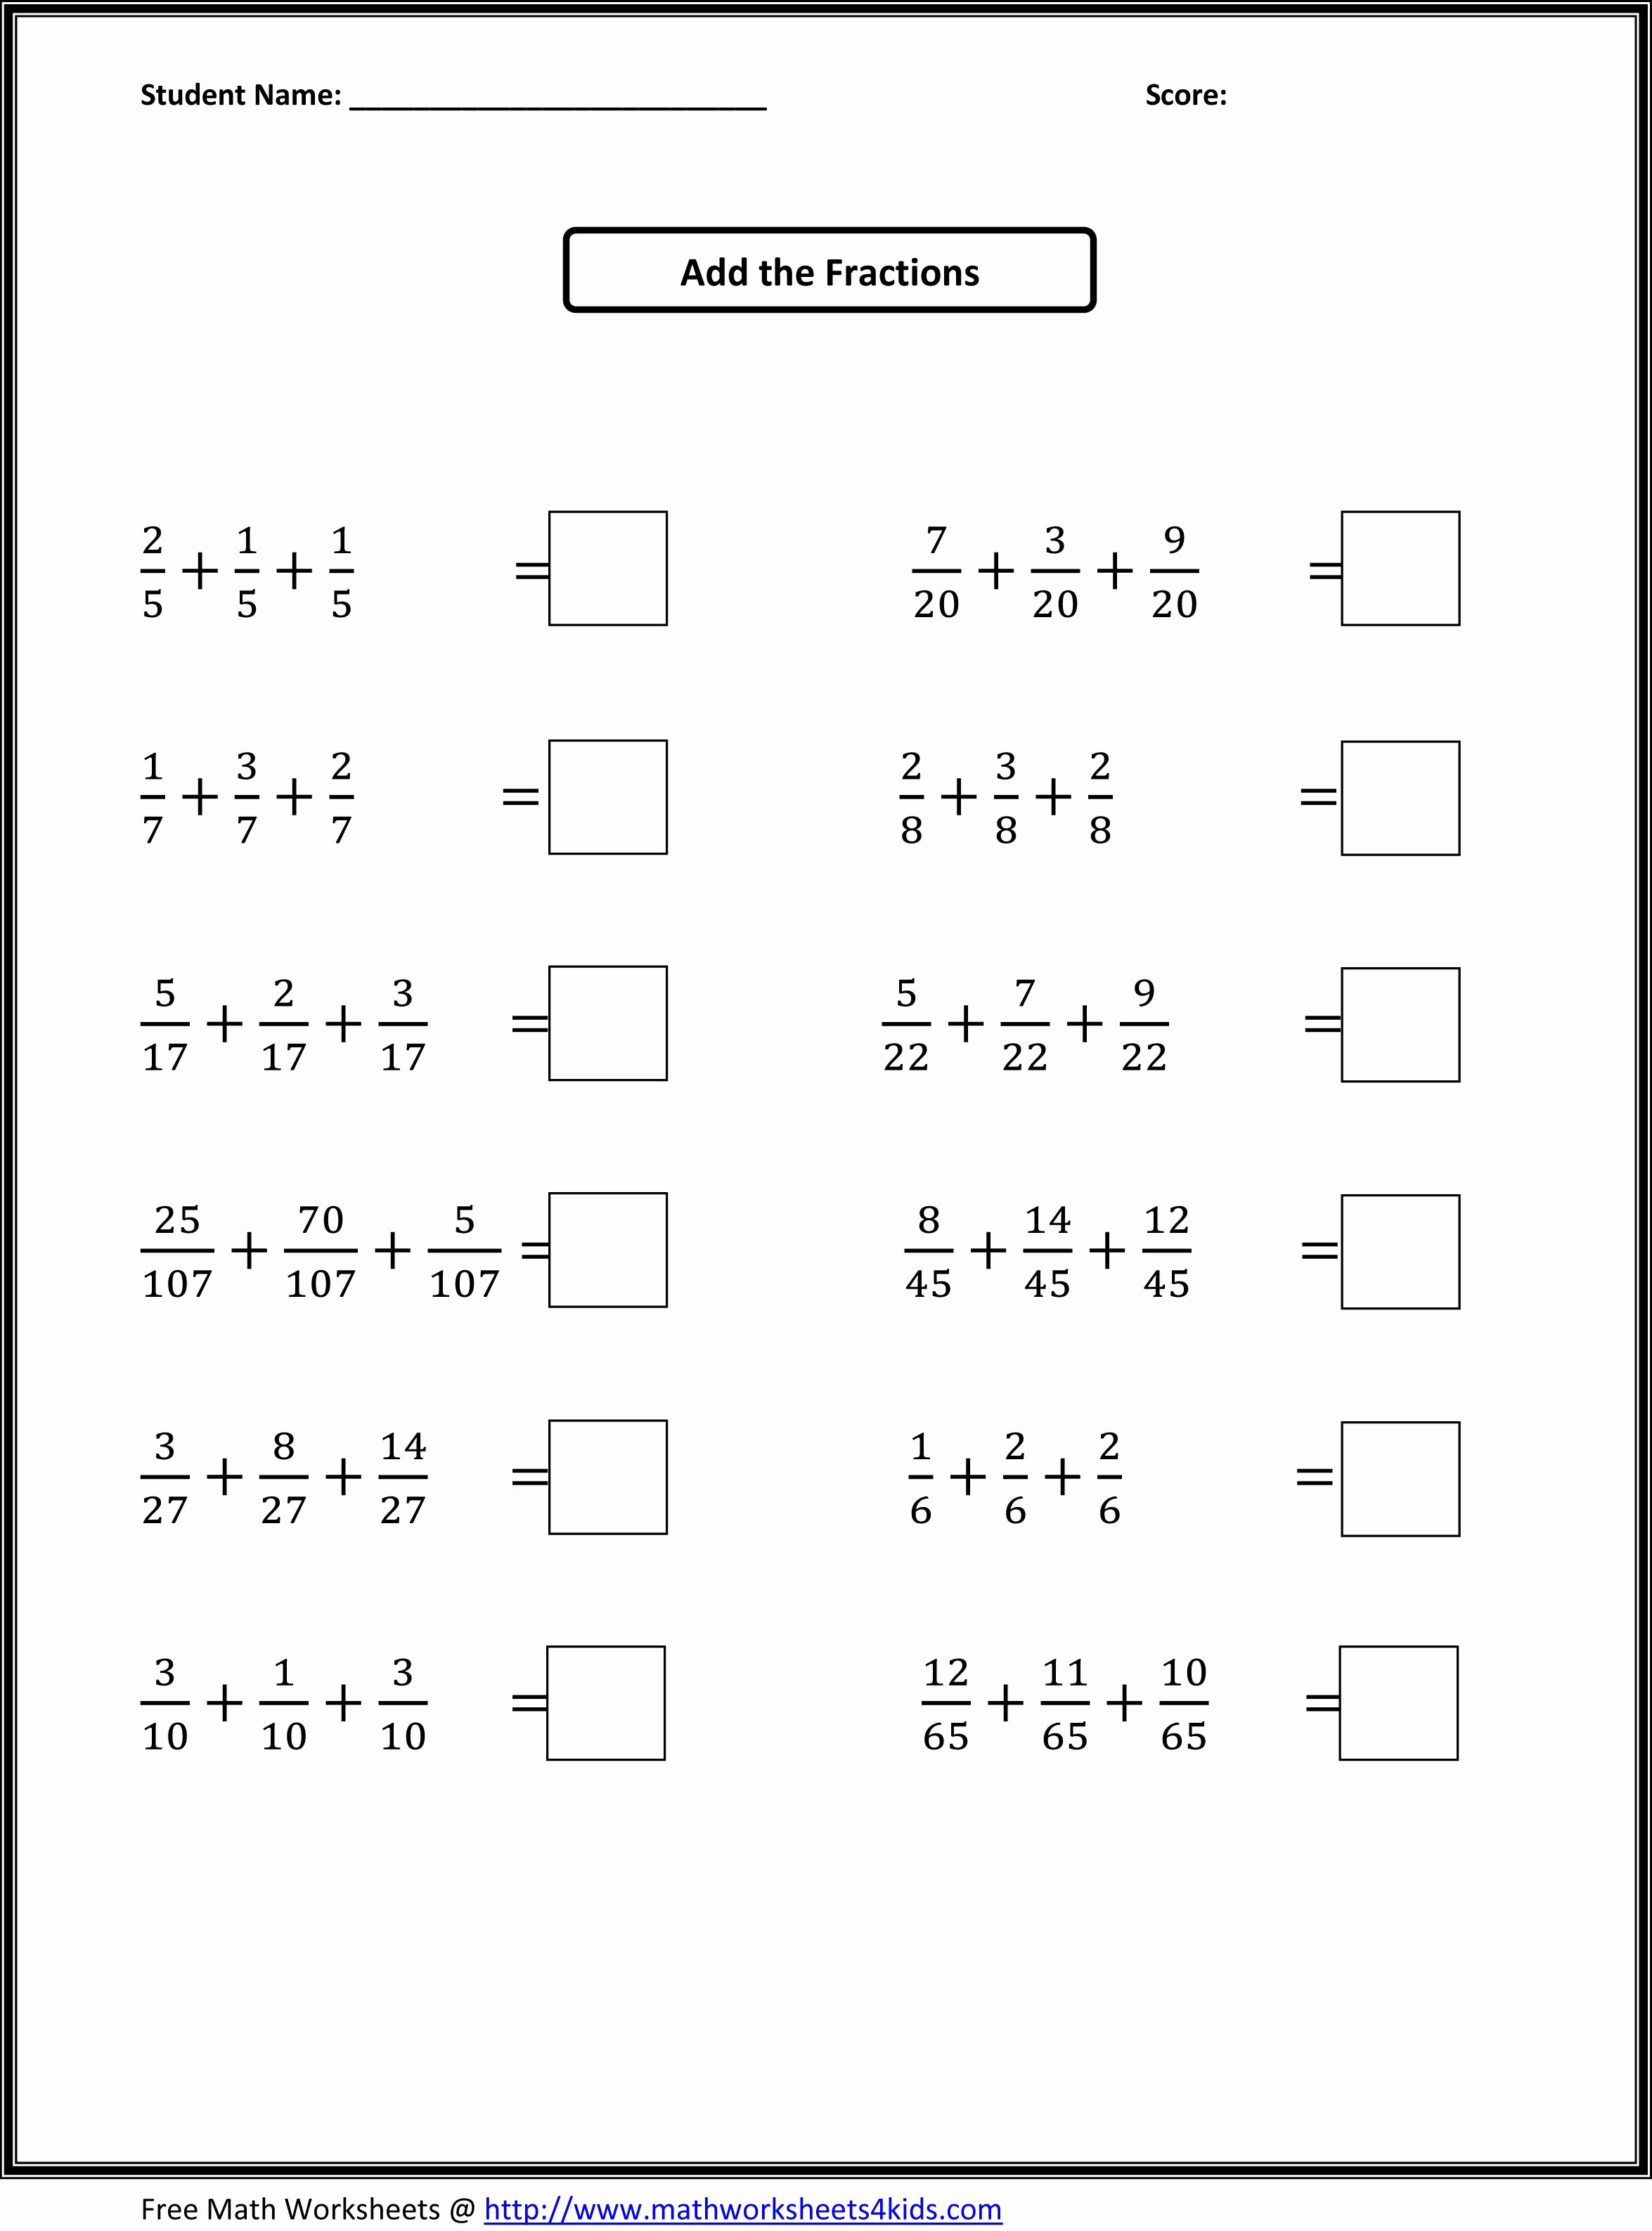 Adding Fractions Worksheets Unique Pin On Teaching Ideas